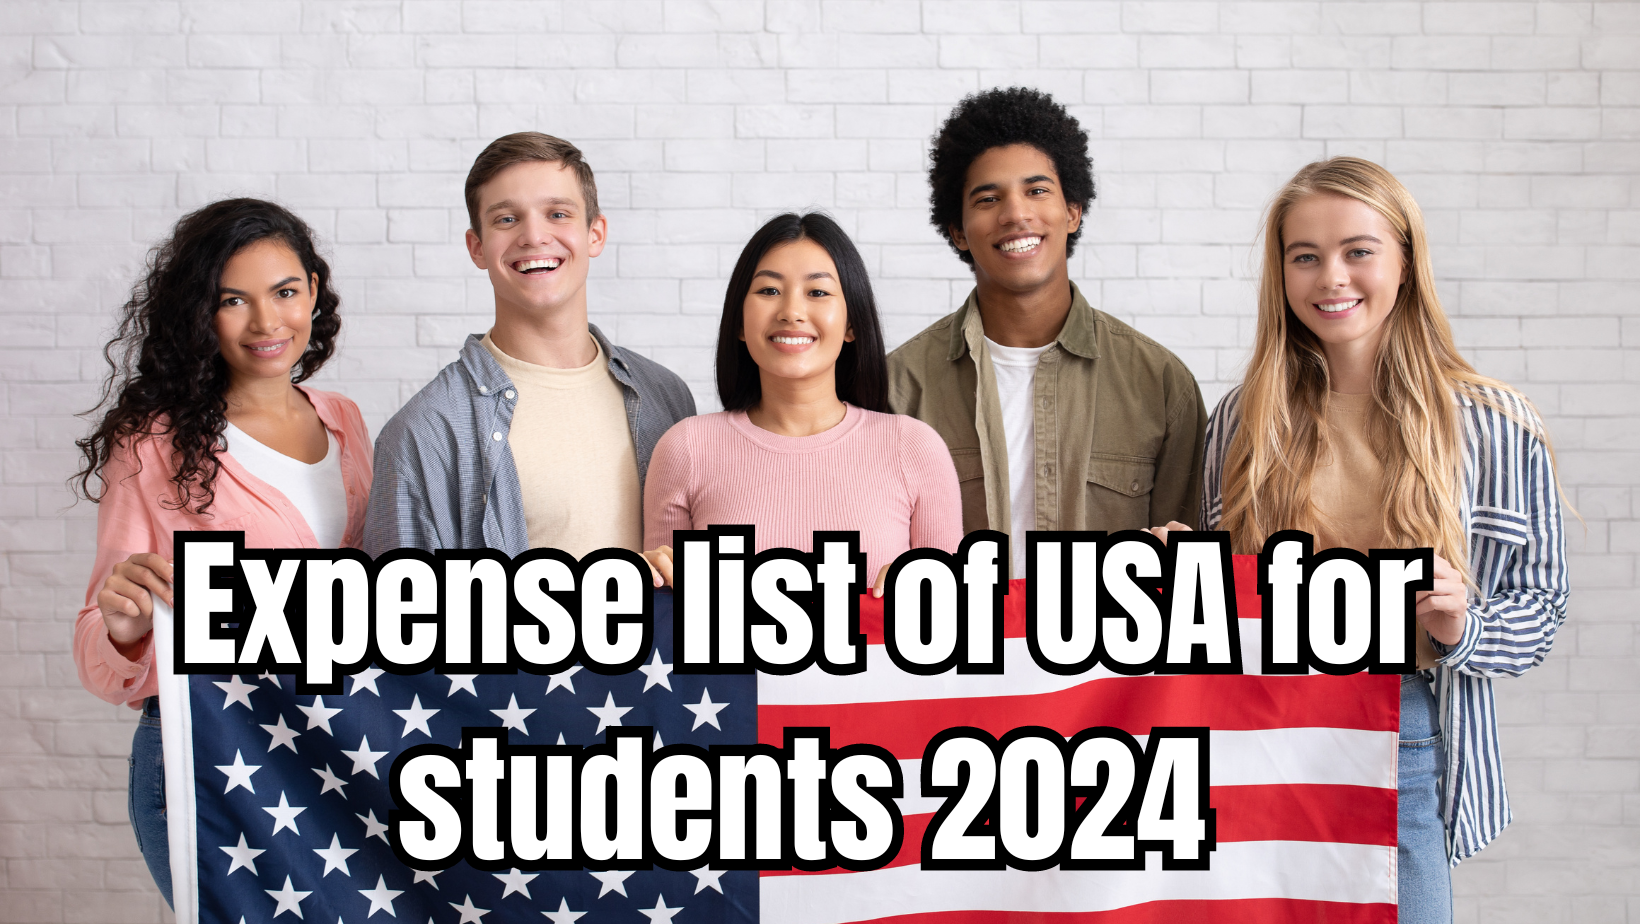 Top   Expense list of USA for  students 2024